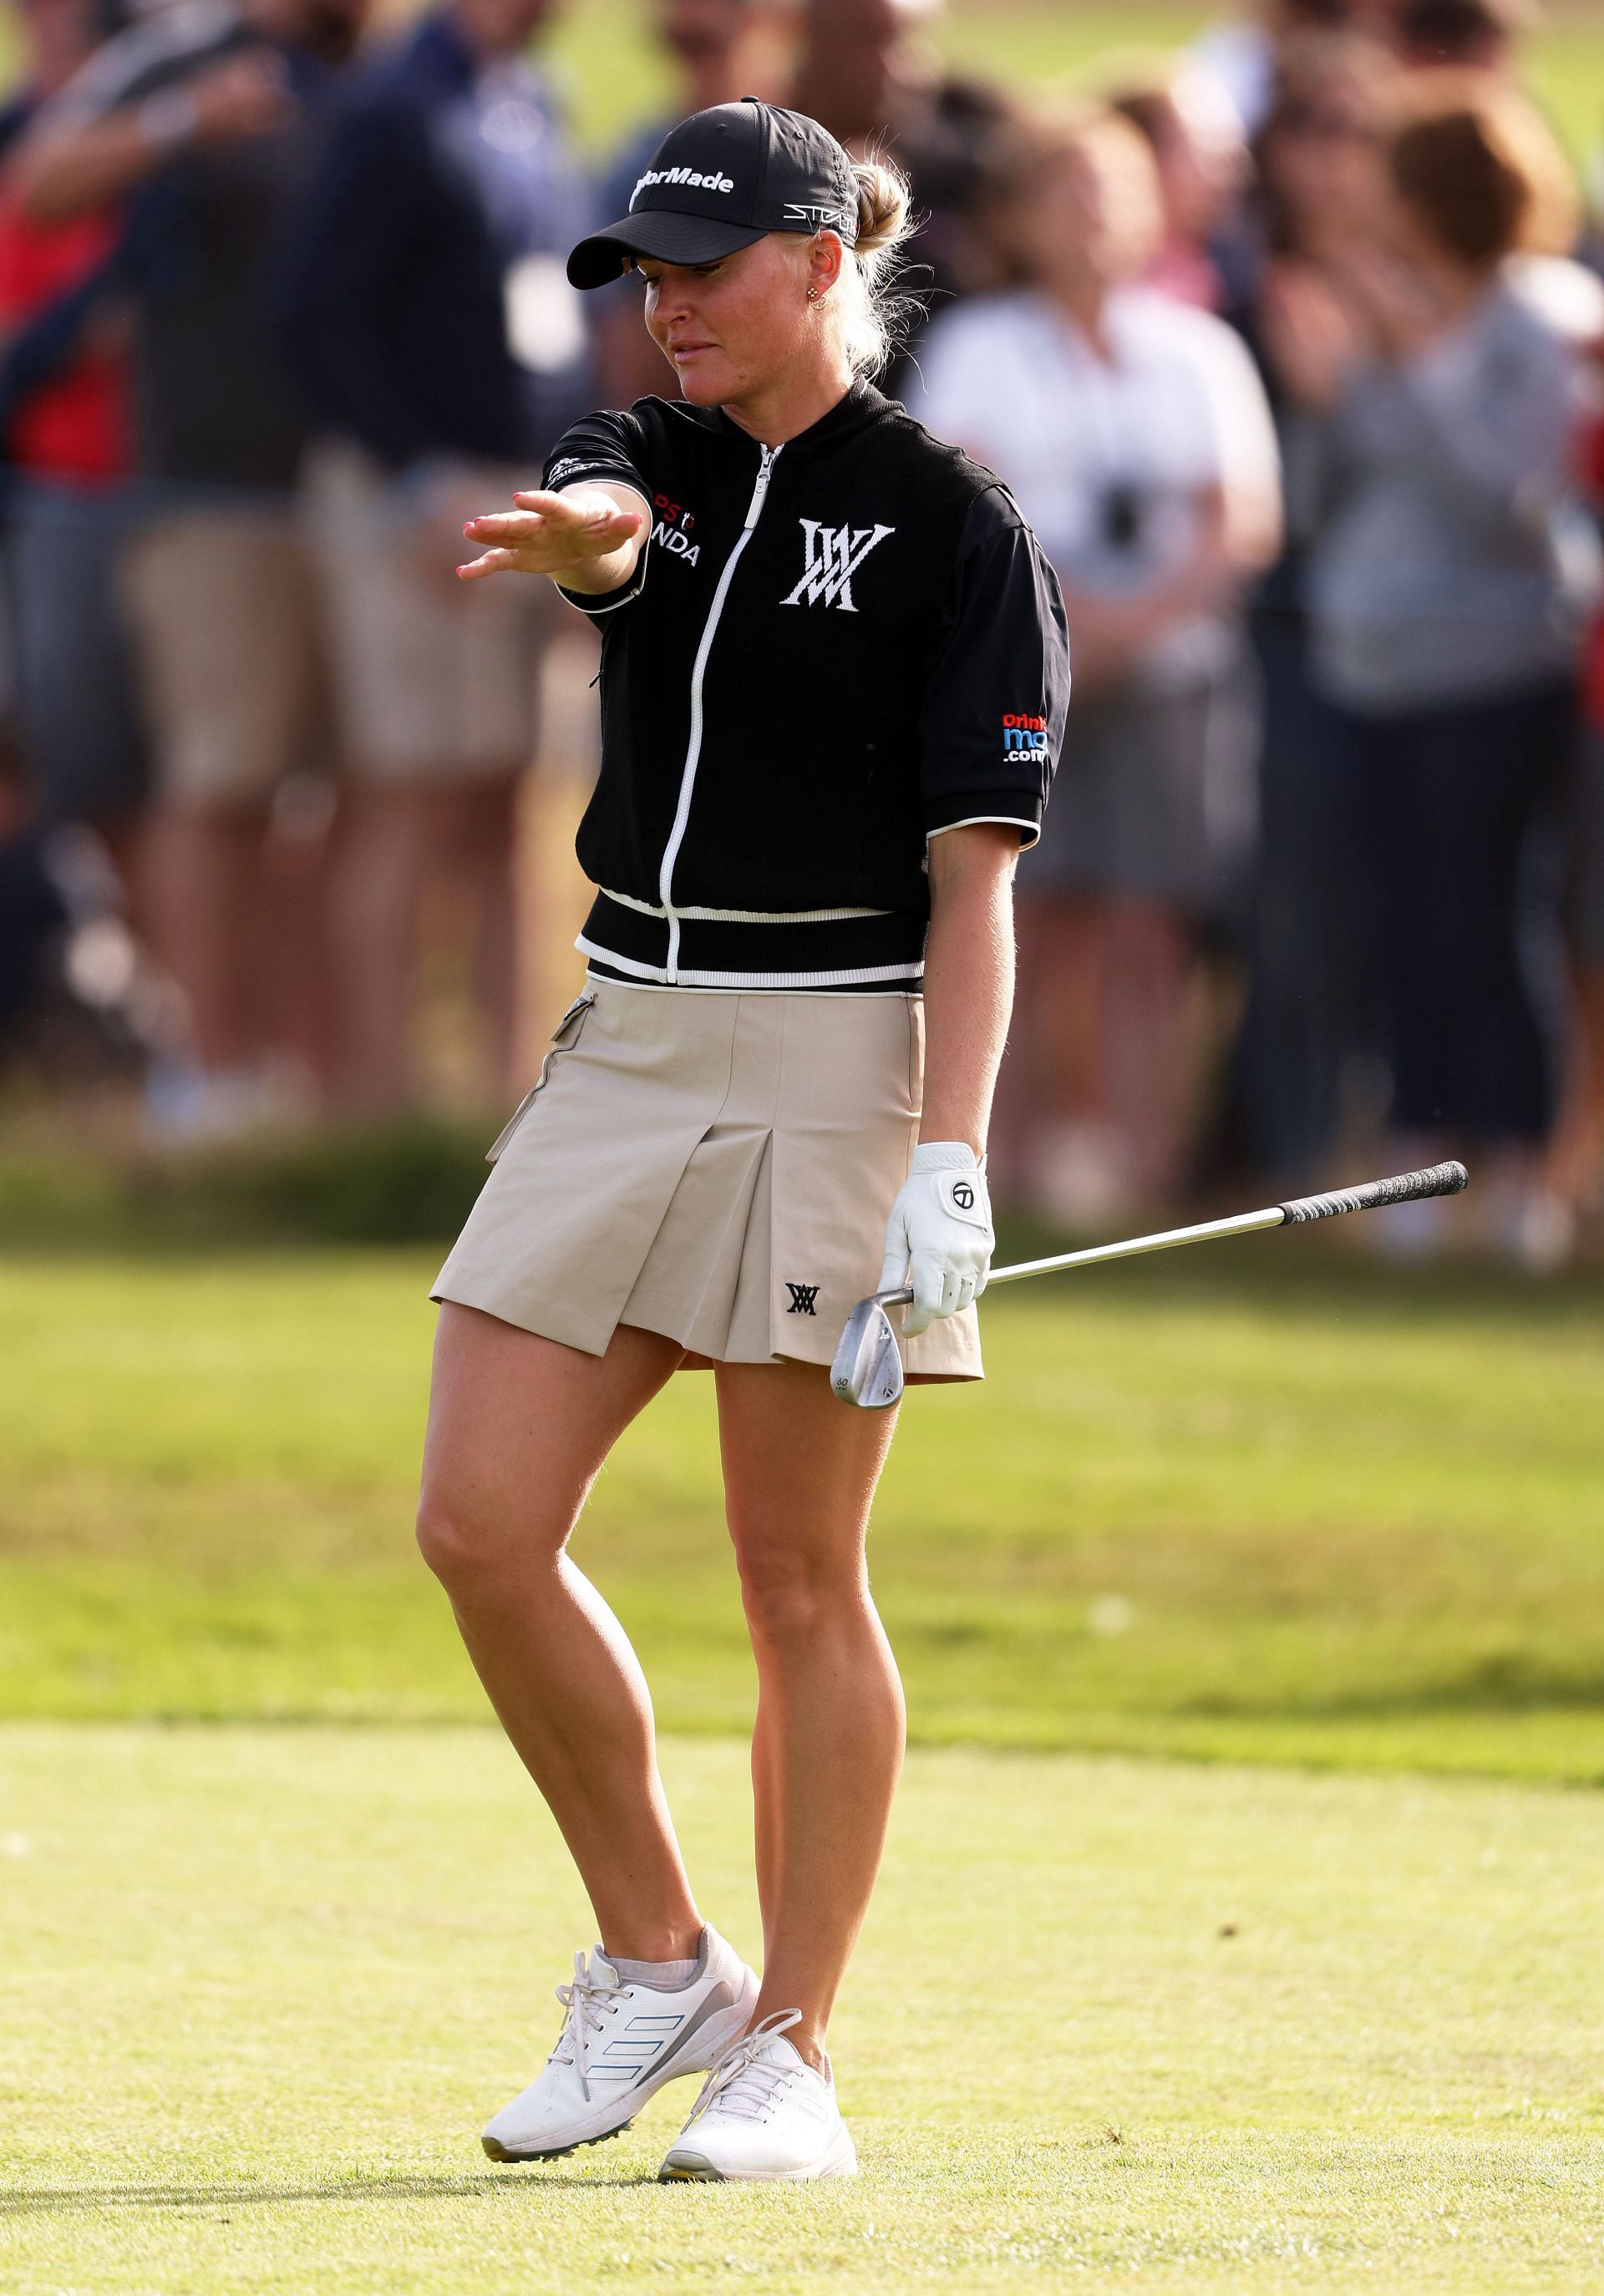 Charley Hull at the AIG Women&#039;s Open (image via Getty)